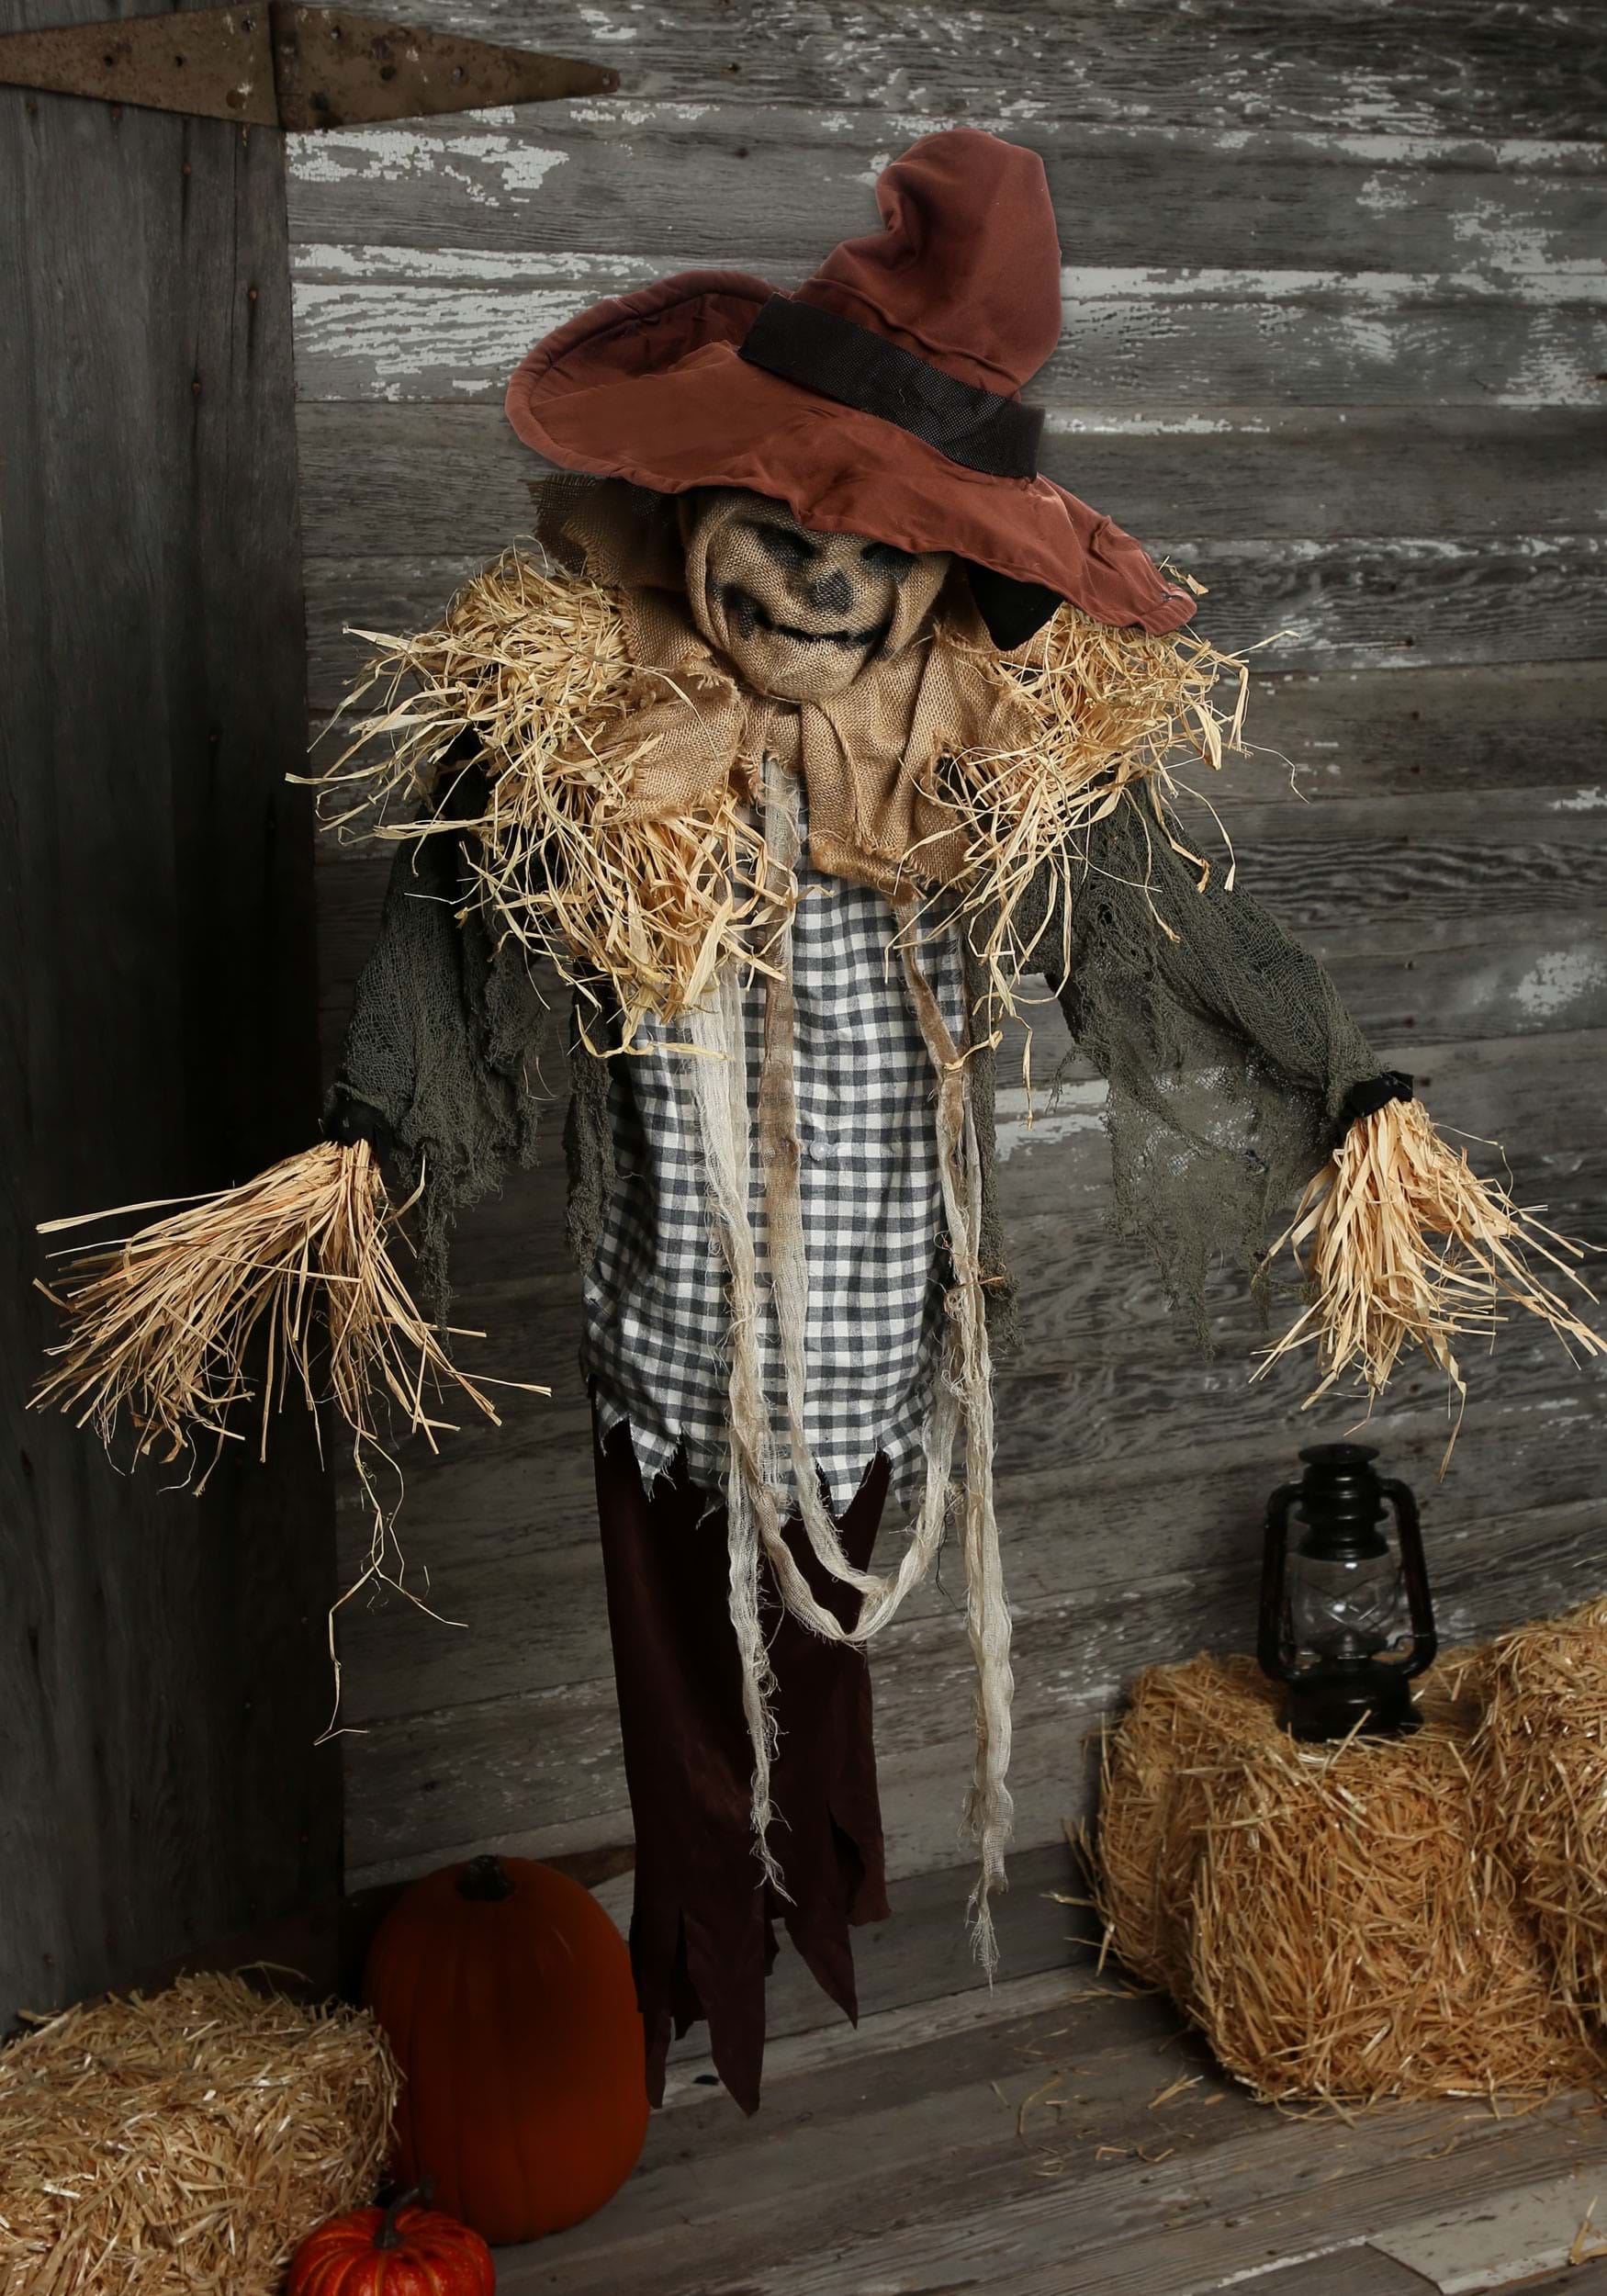 Animated Hanging Surprise Scarecrow Prop